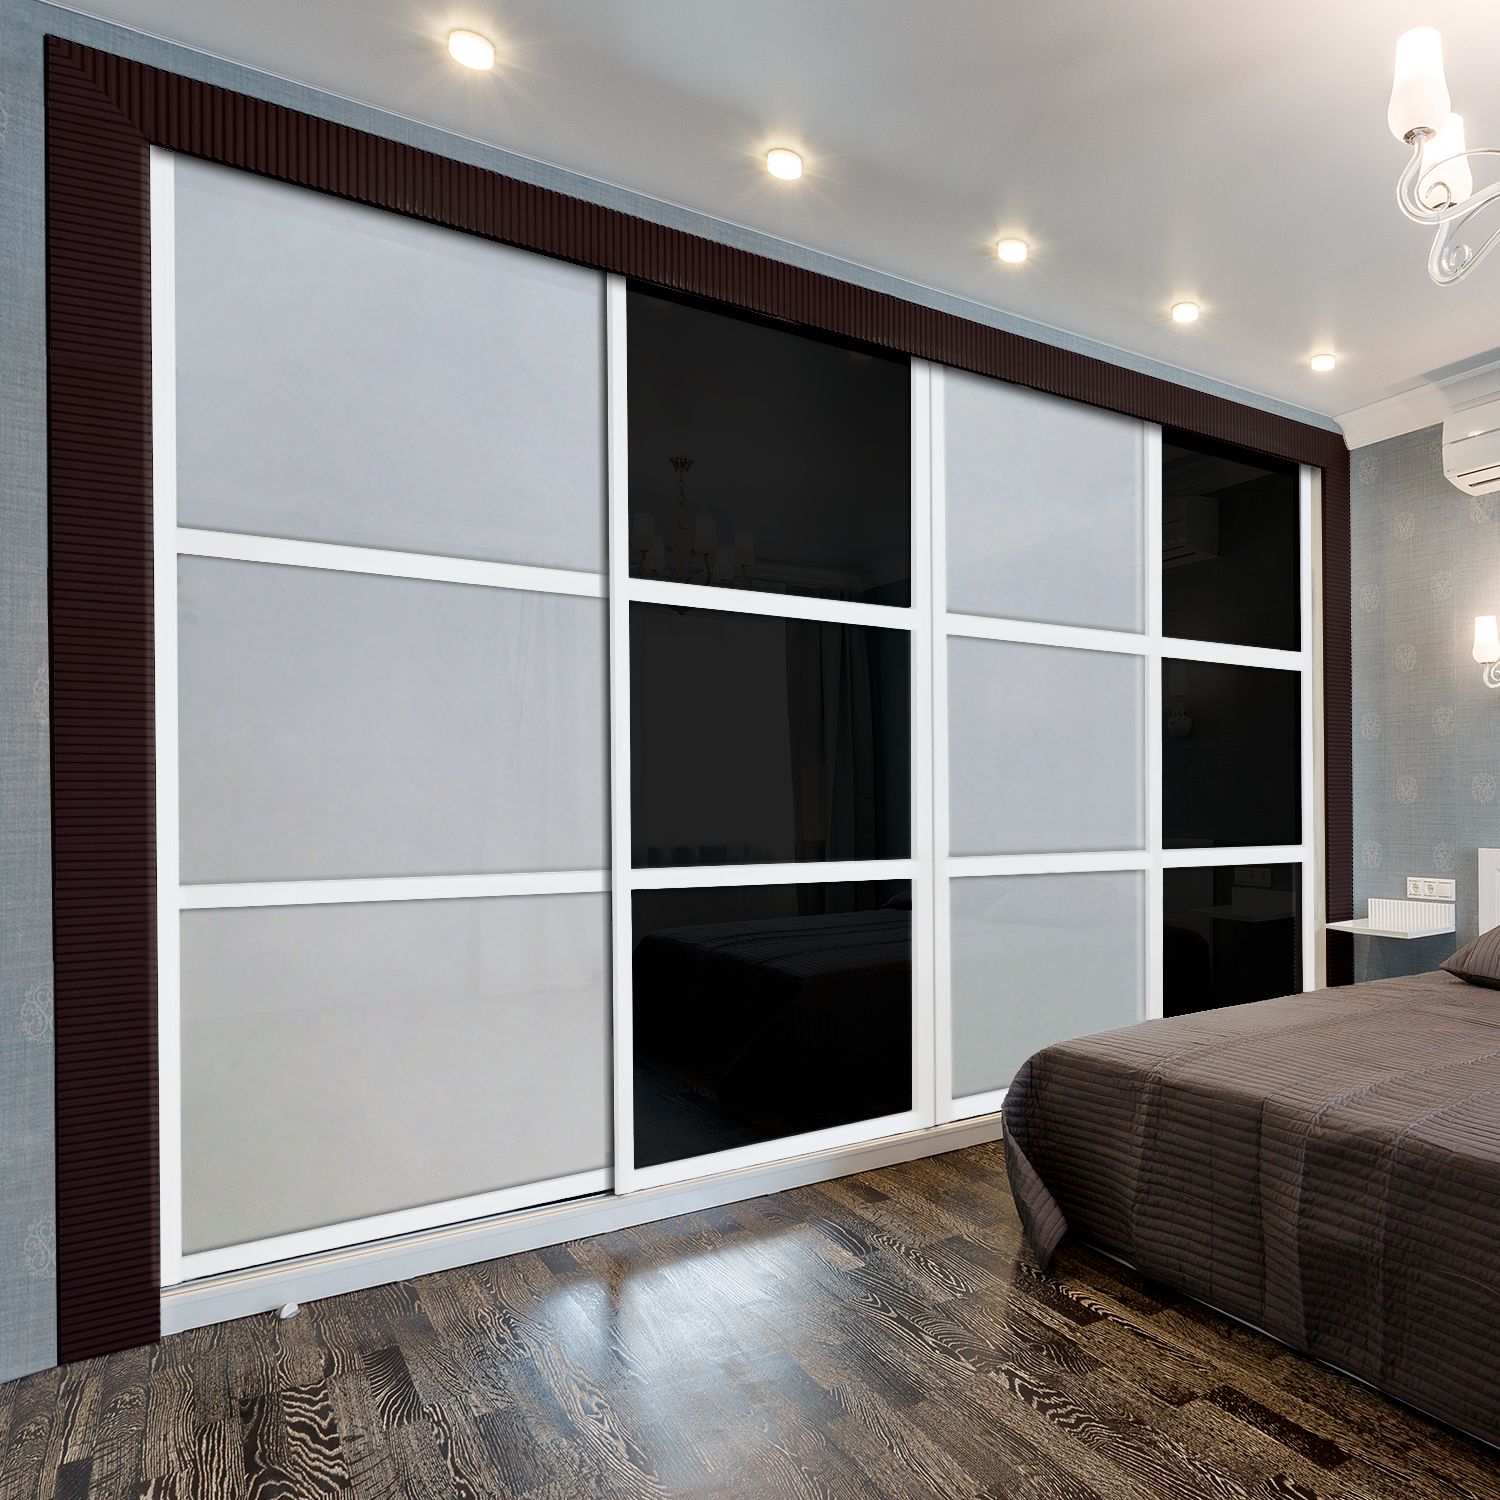 4 Leaf Framed Shaker Closet Door With Glass Insert Throughout Black Sliding Wardrobes (View 13 of 15)